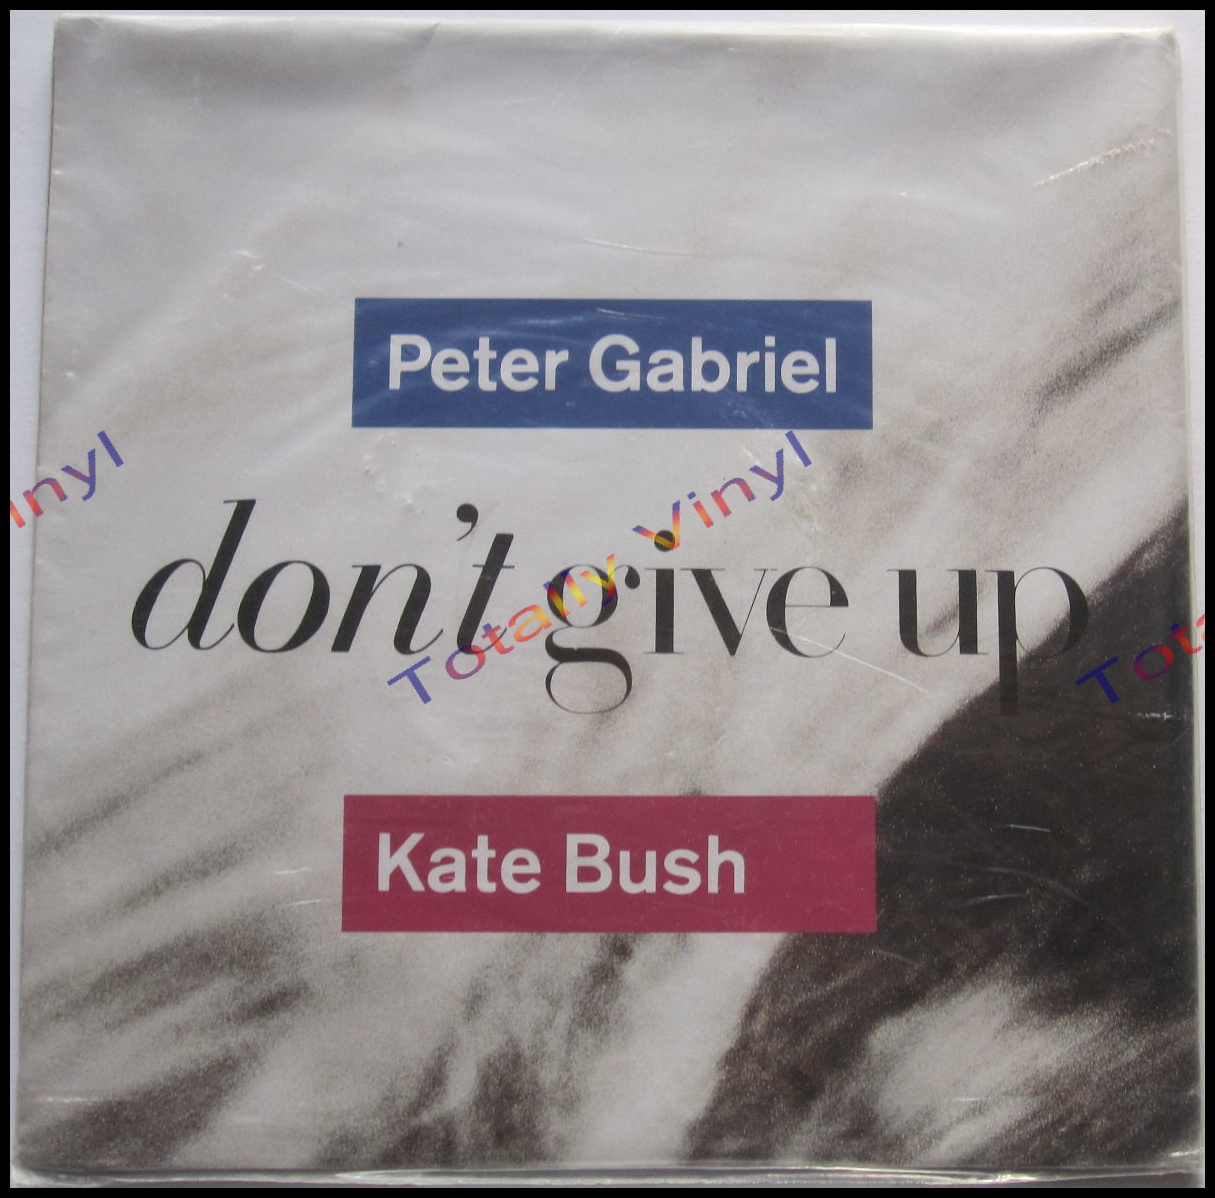 Vinyl || Gabriel and Kate Bush, Peter - Don't give up / In your eyes 7 inch Special